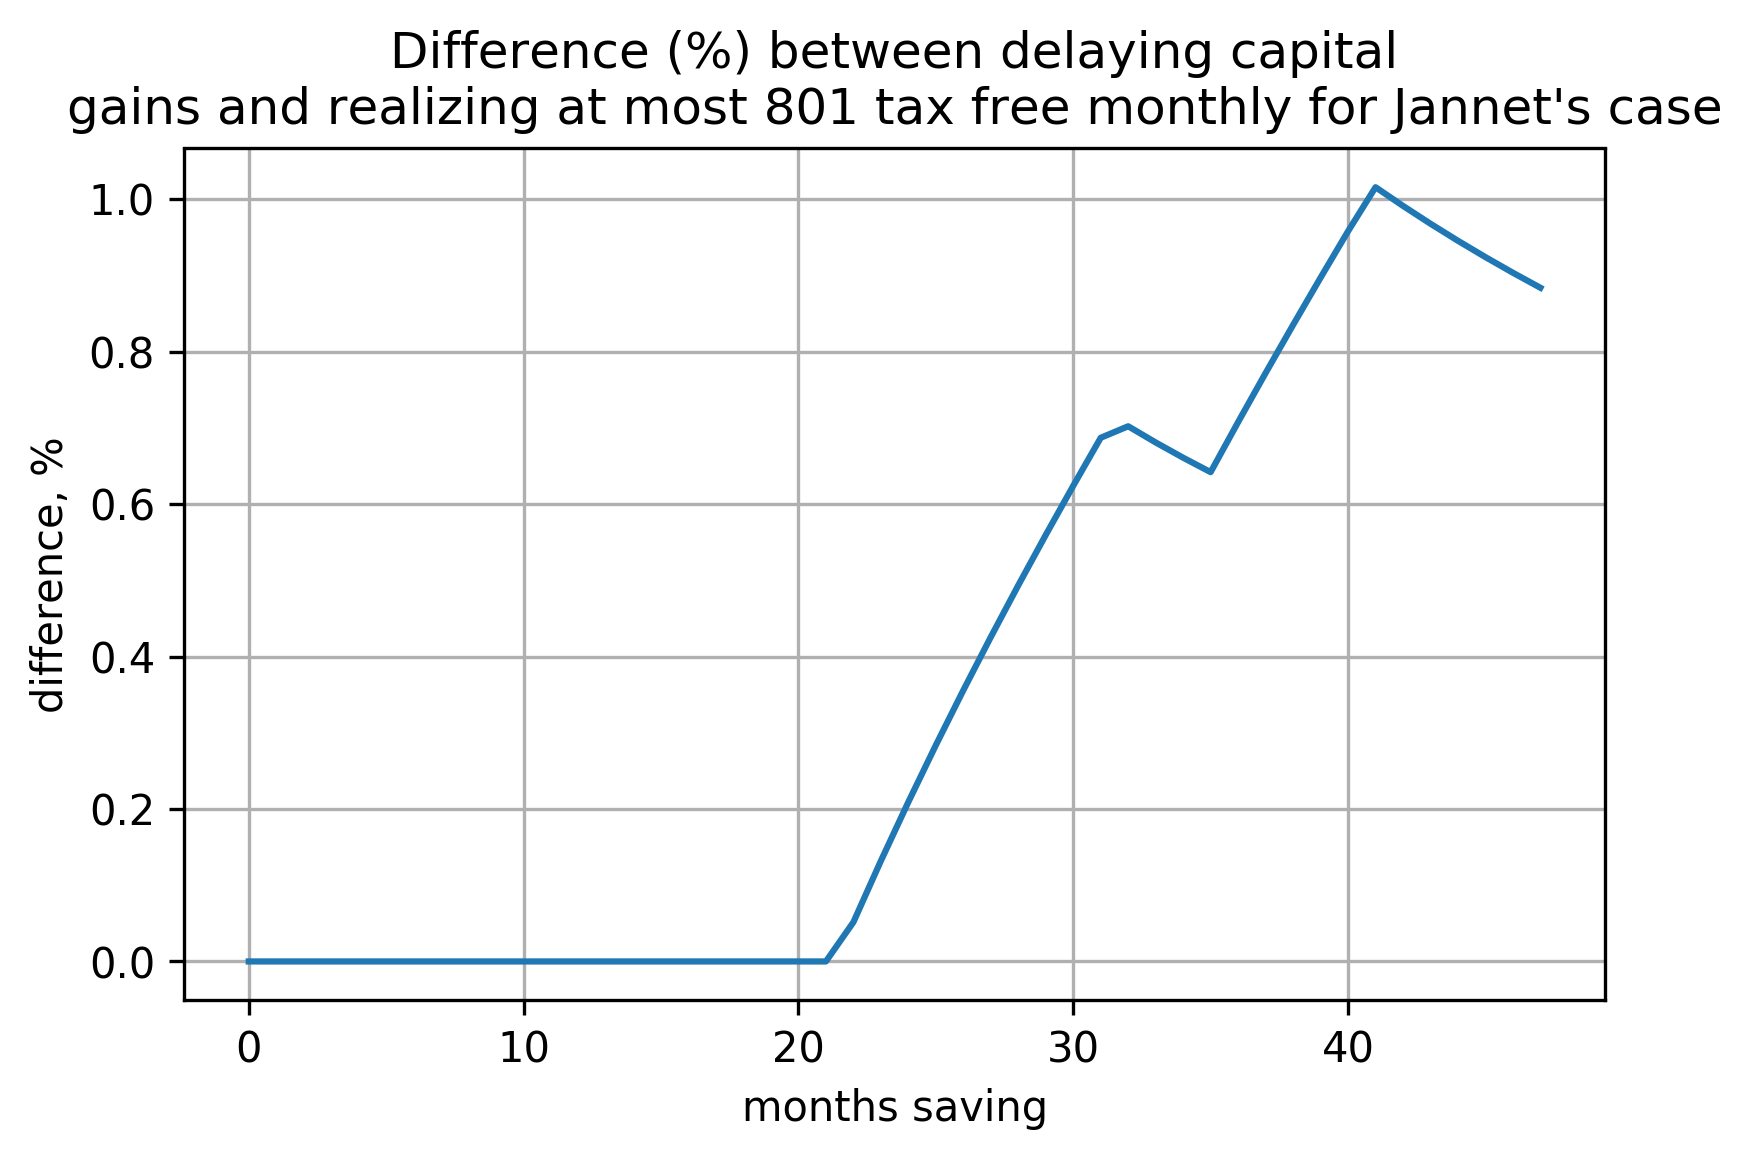 a plot showing how difference (in percents) between the two cases (delaying capital gains and
realizing at most 801 EUR tax free yearly) depends on number of months invested
for Jannet's case